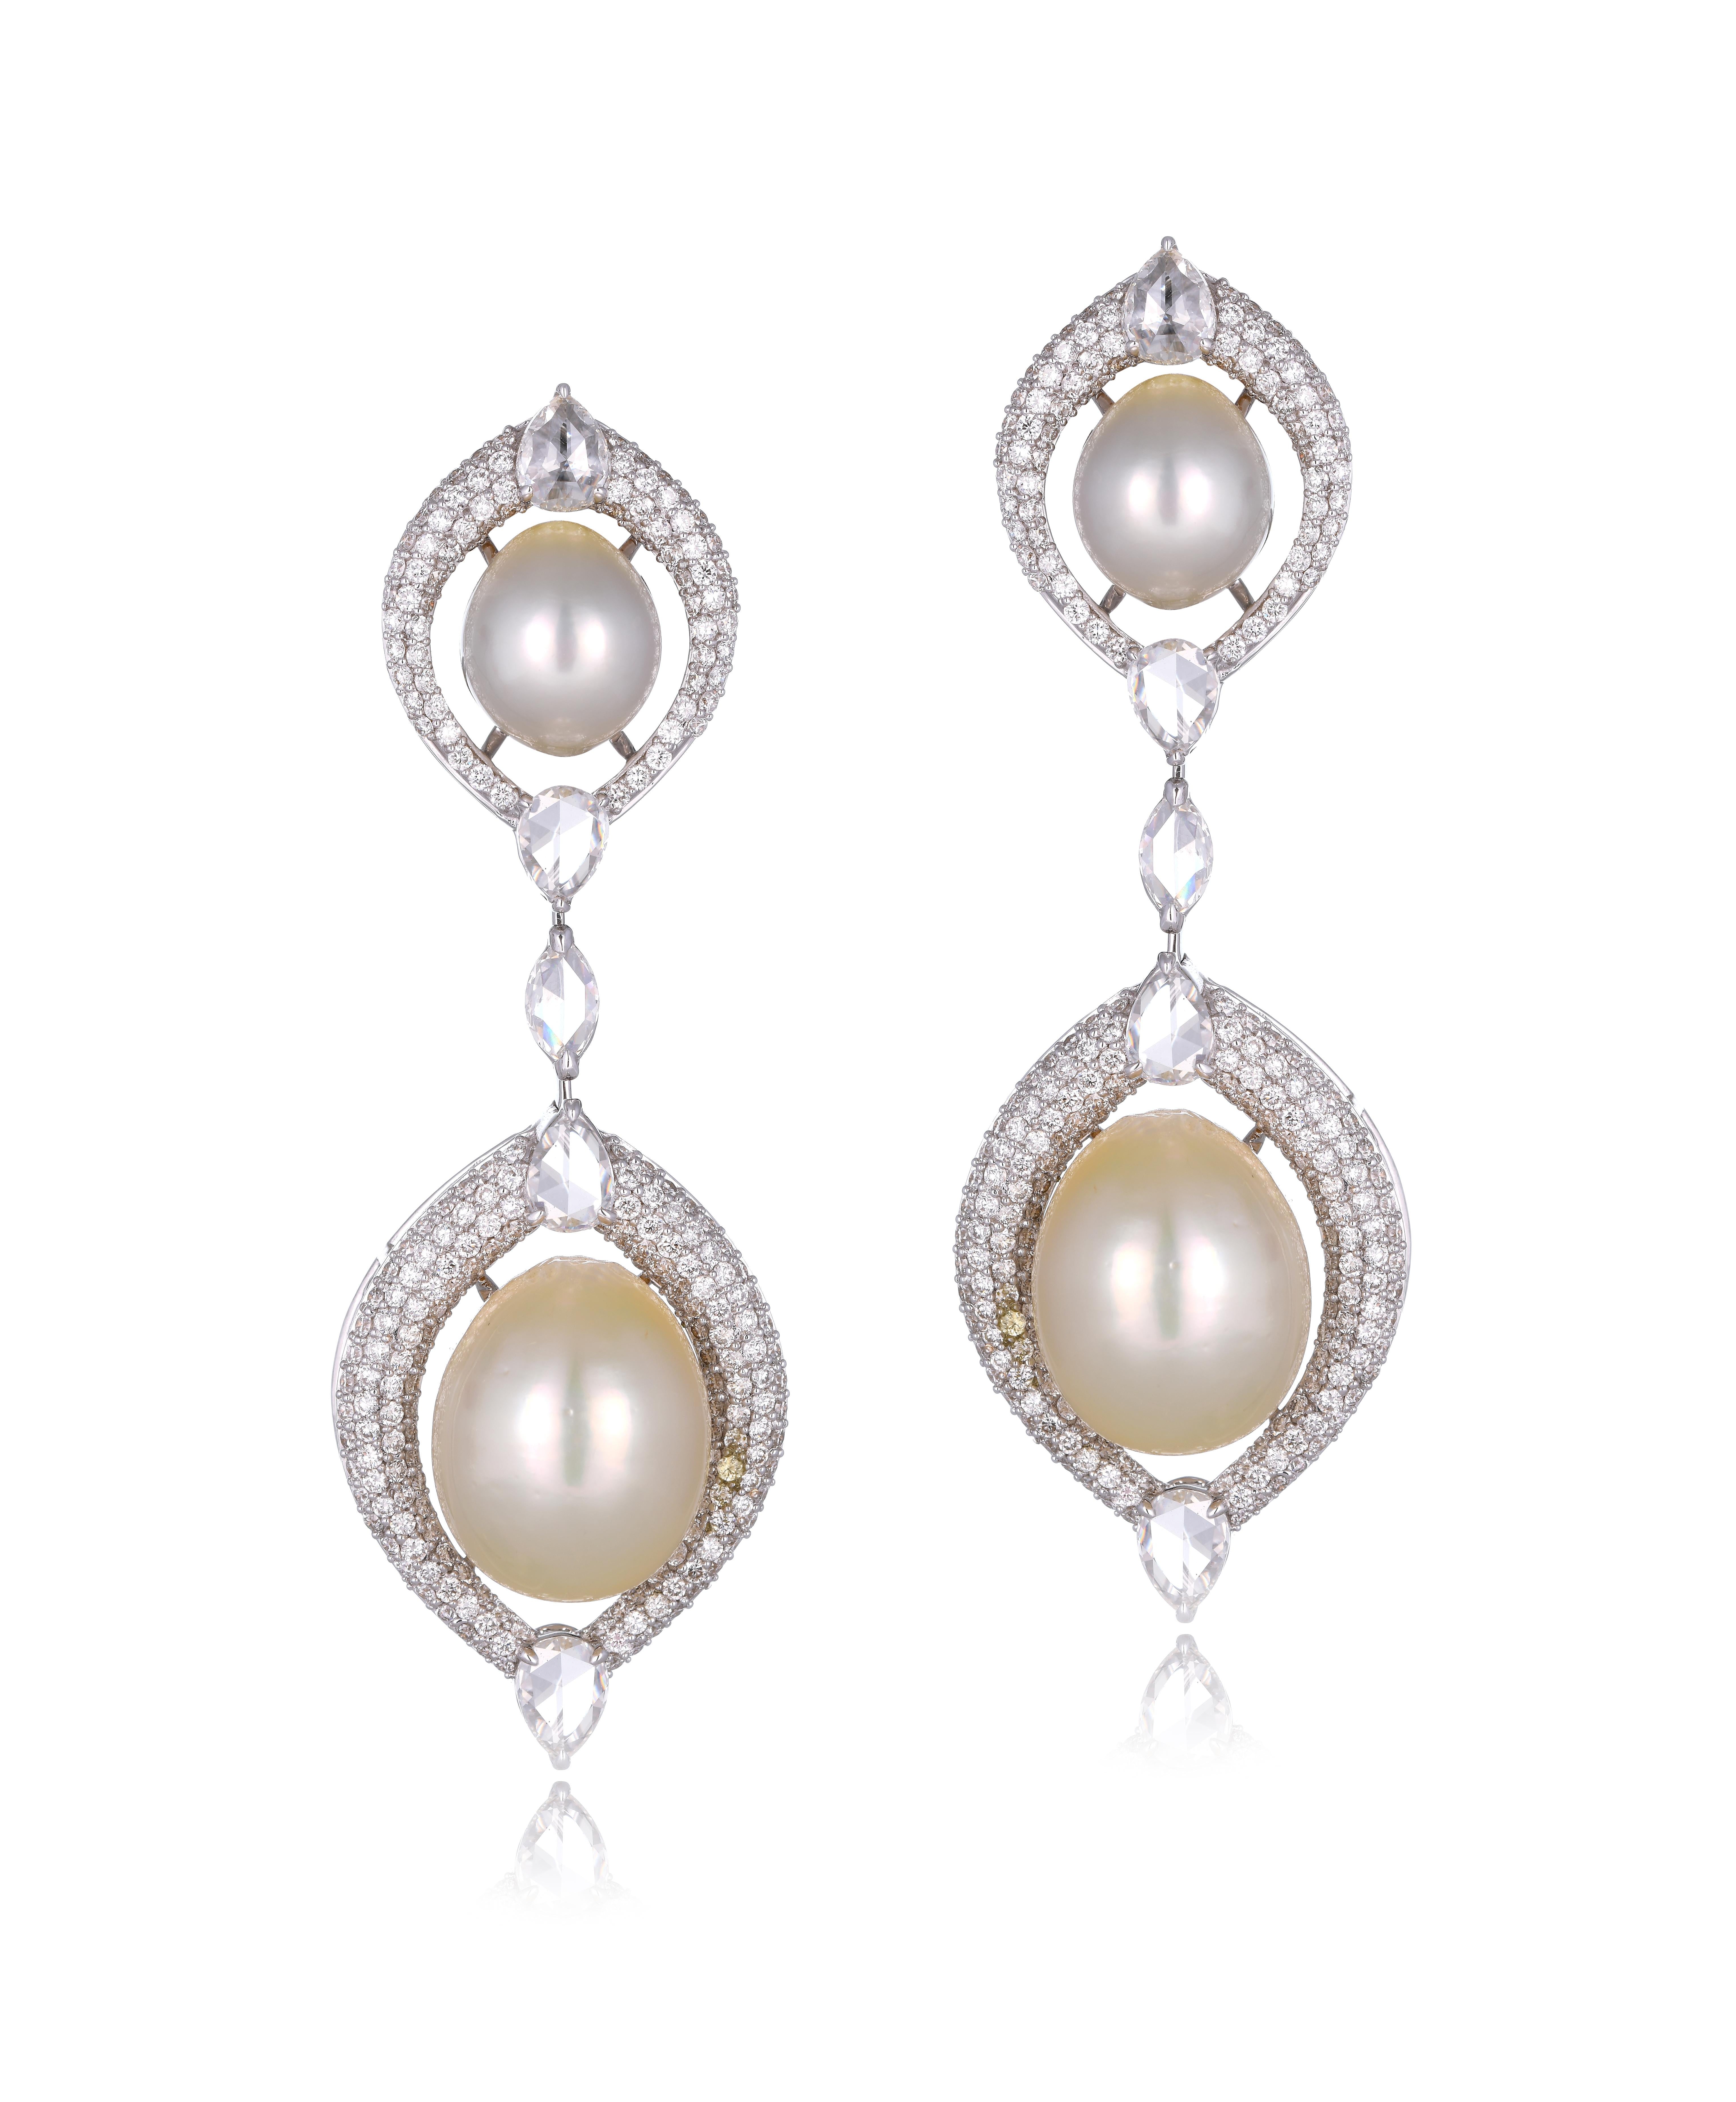 Natural South Pearl and Diamond Necklace with Earrings For Sale 1